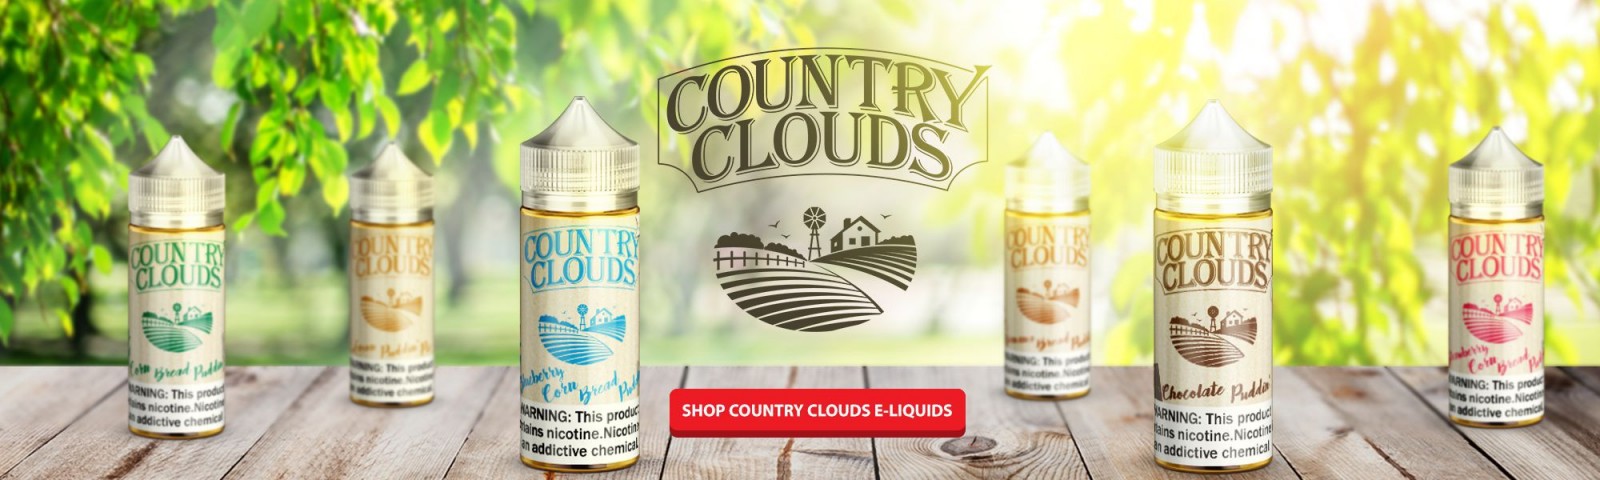 COUNTRY CLOUDS